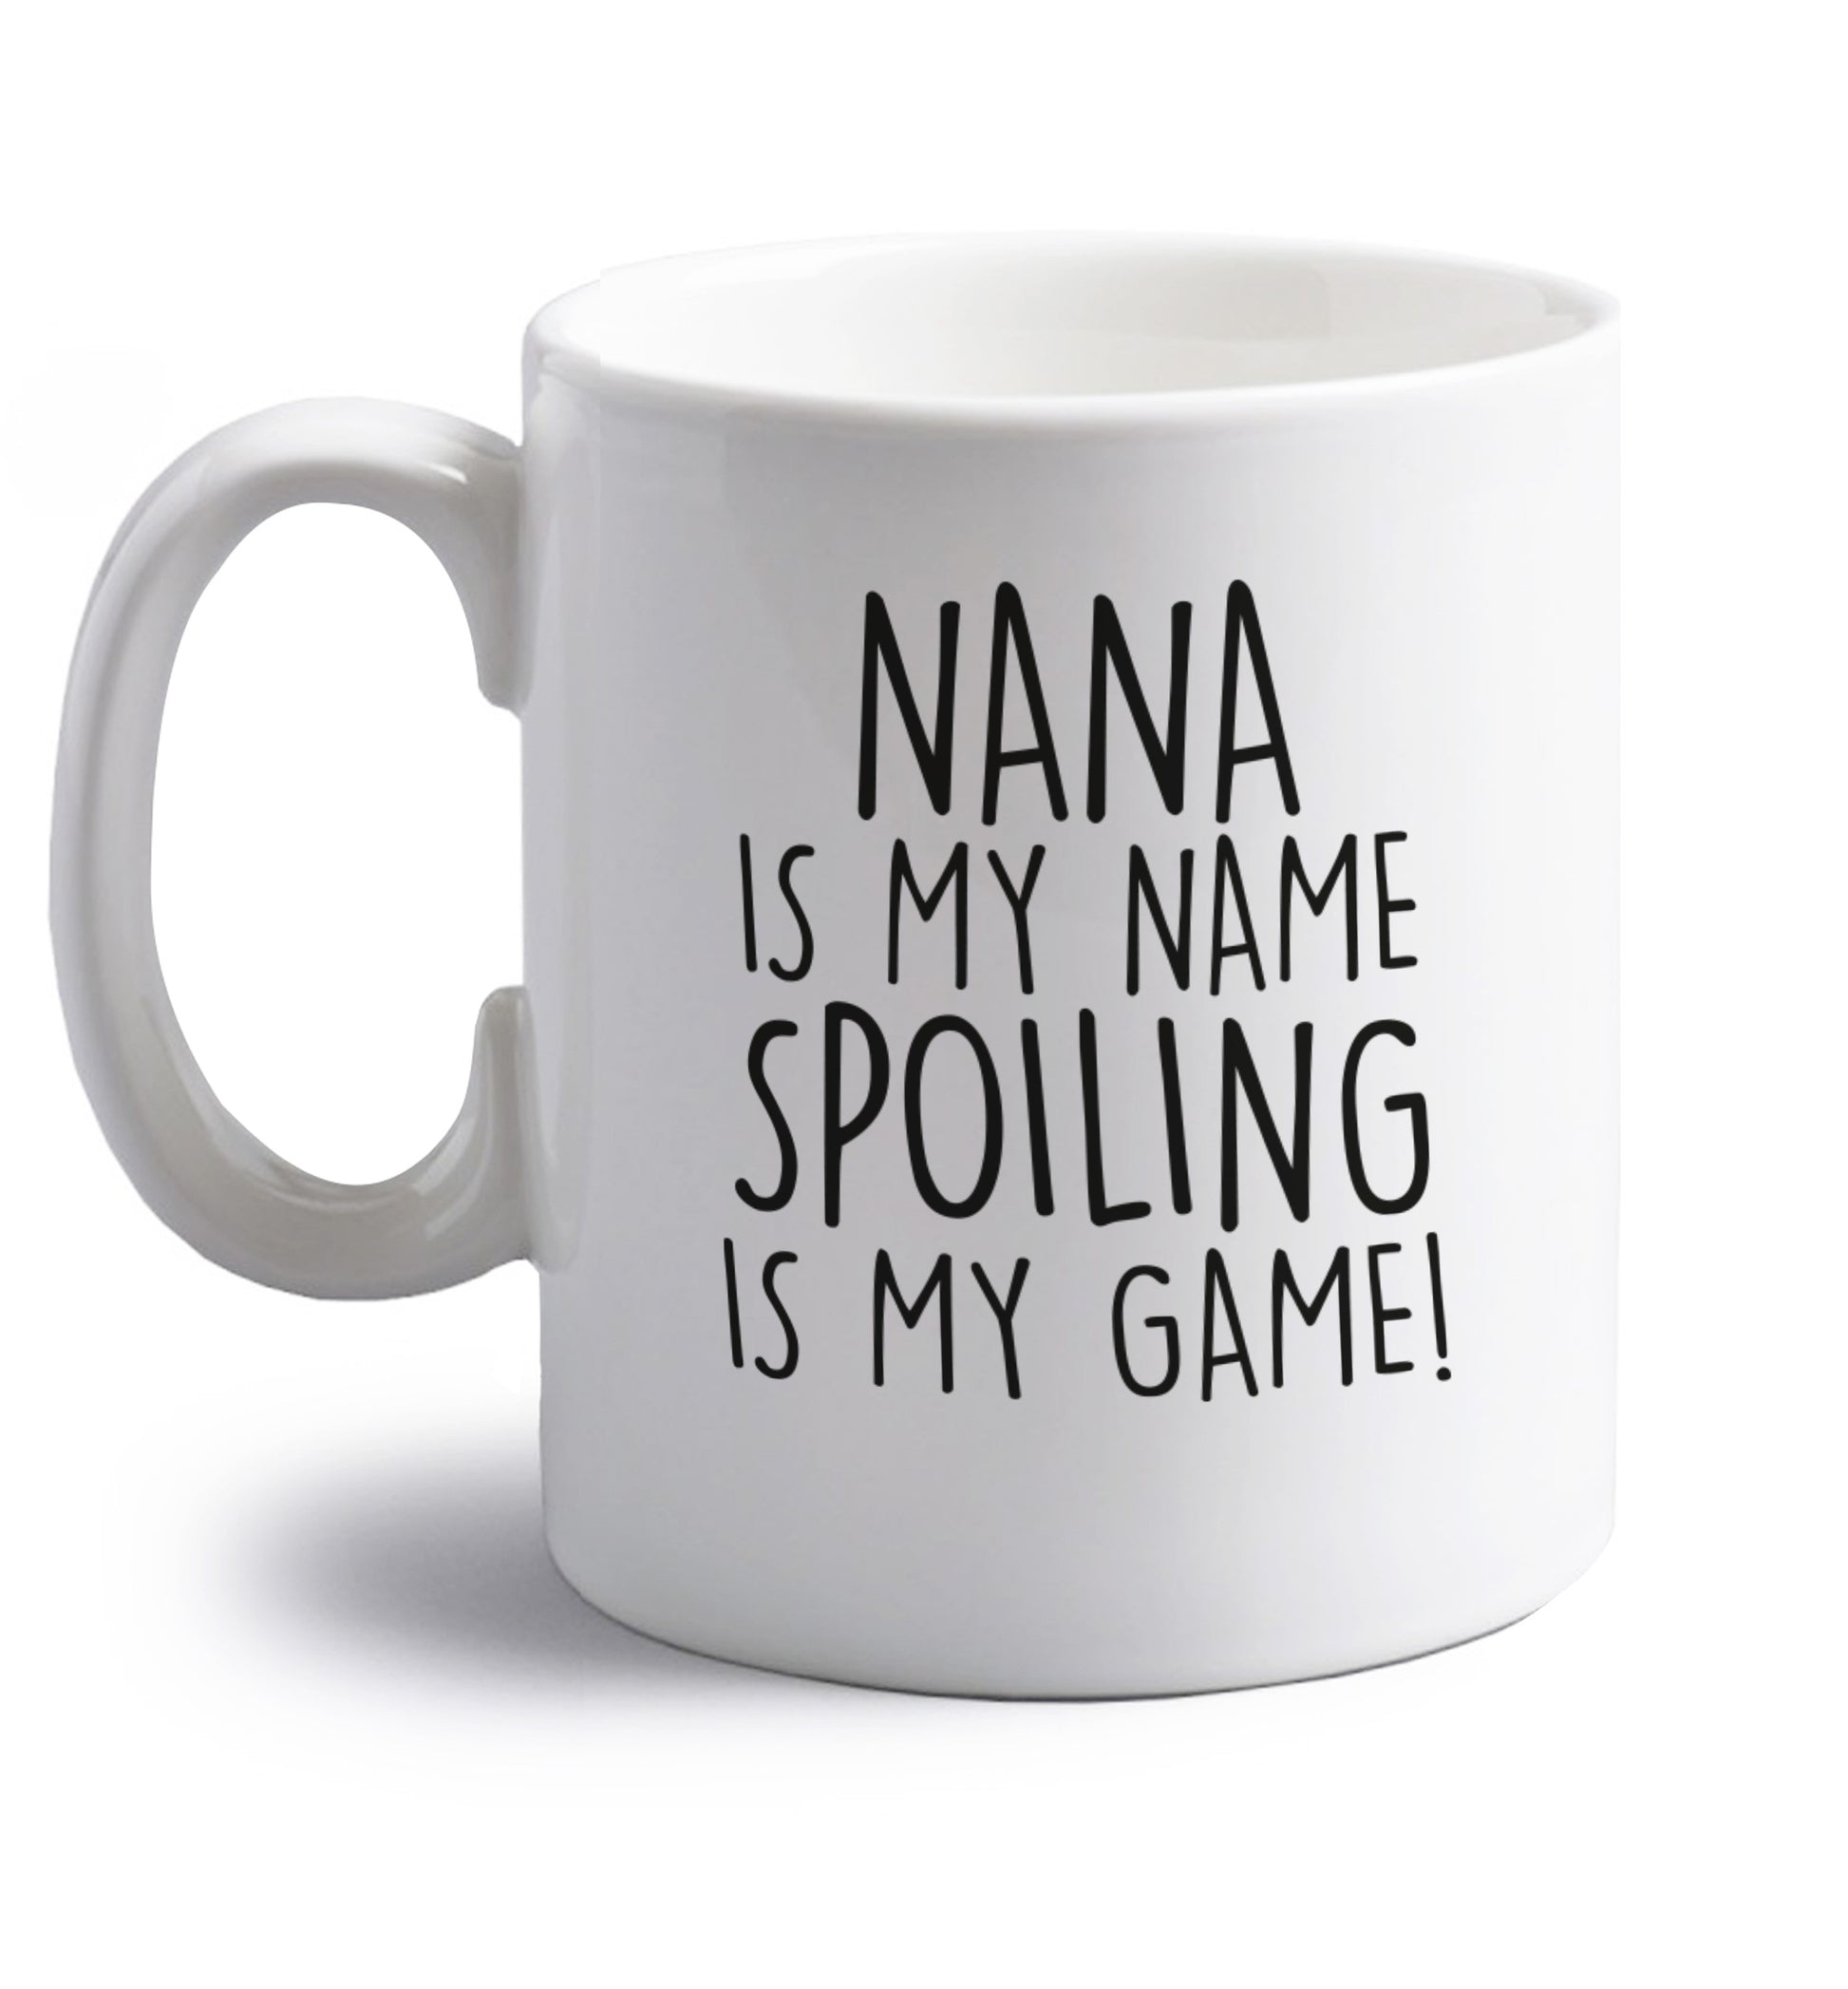 Nana is my name, spoiling is my game right handed white ceramic mug 